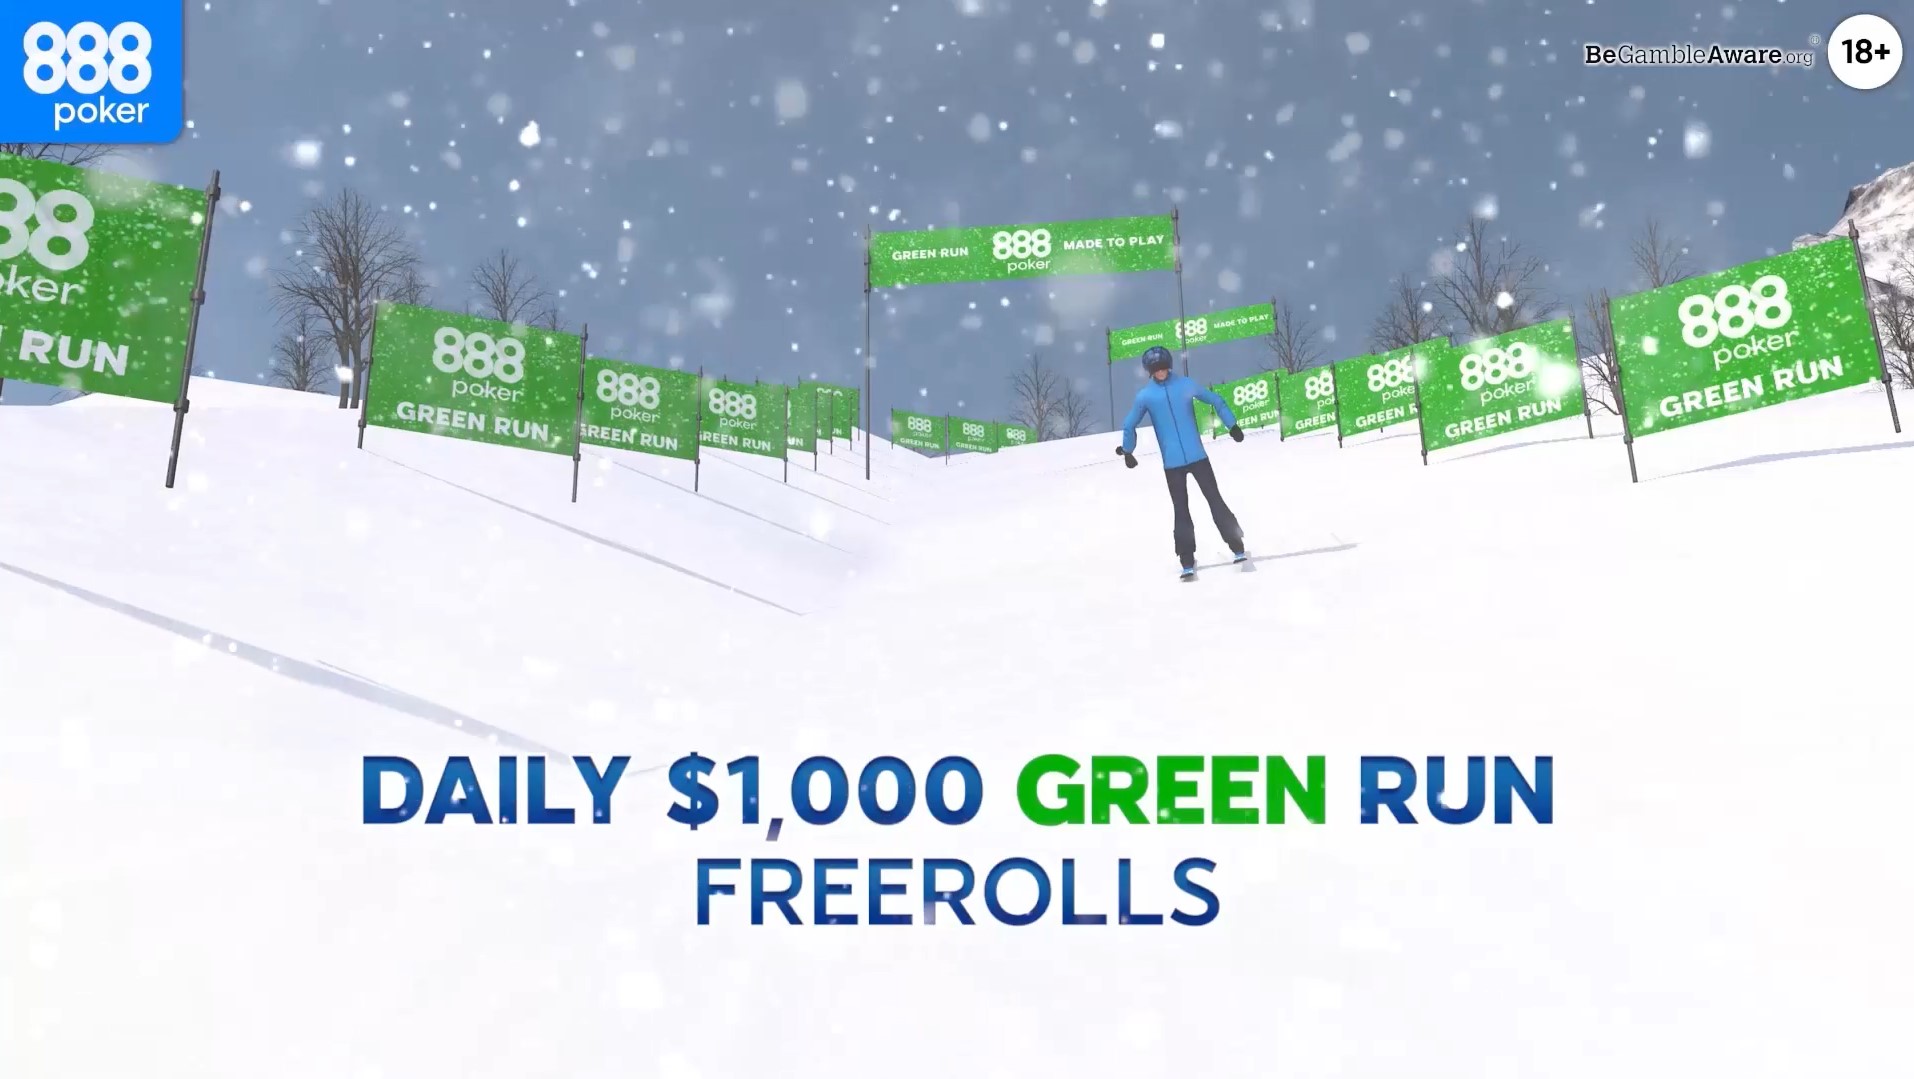 Ace the Slopes - Ollie Green Run Freeroll Tickets